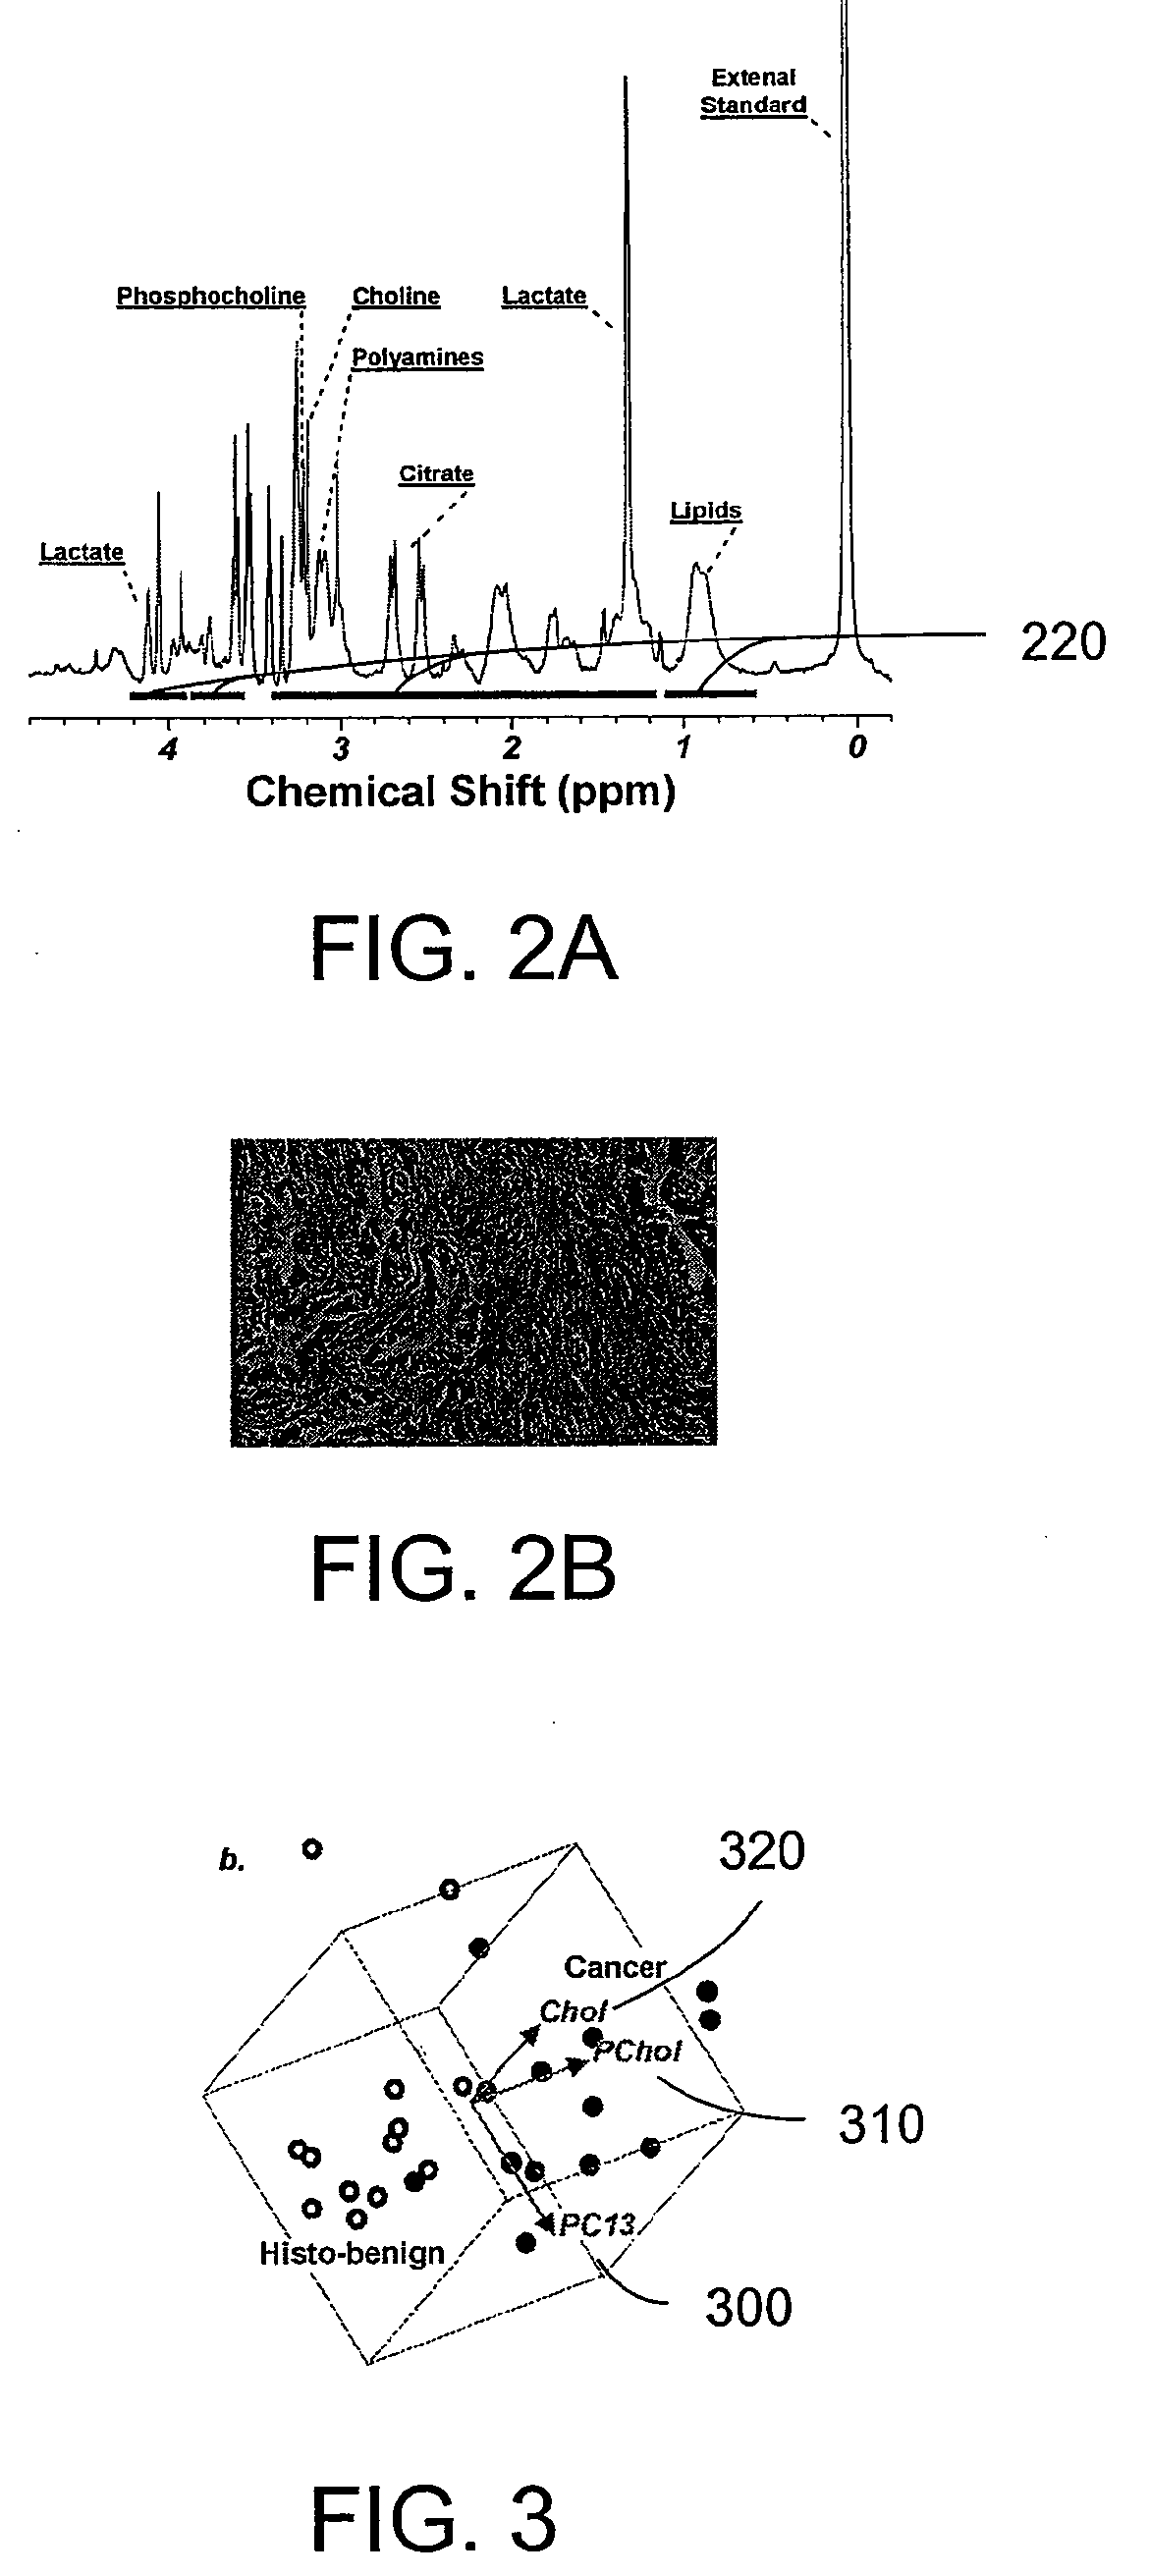 System, method and software arrangement for analyzing and correlating molecular profiles associated with anatomical structures